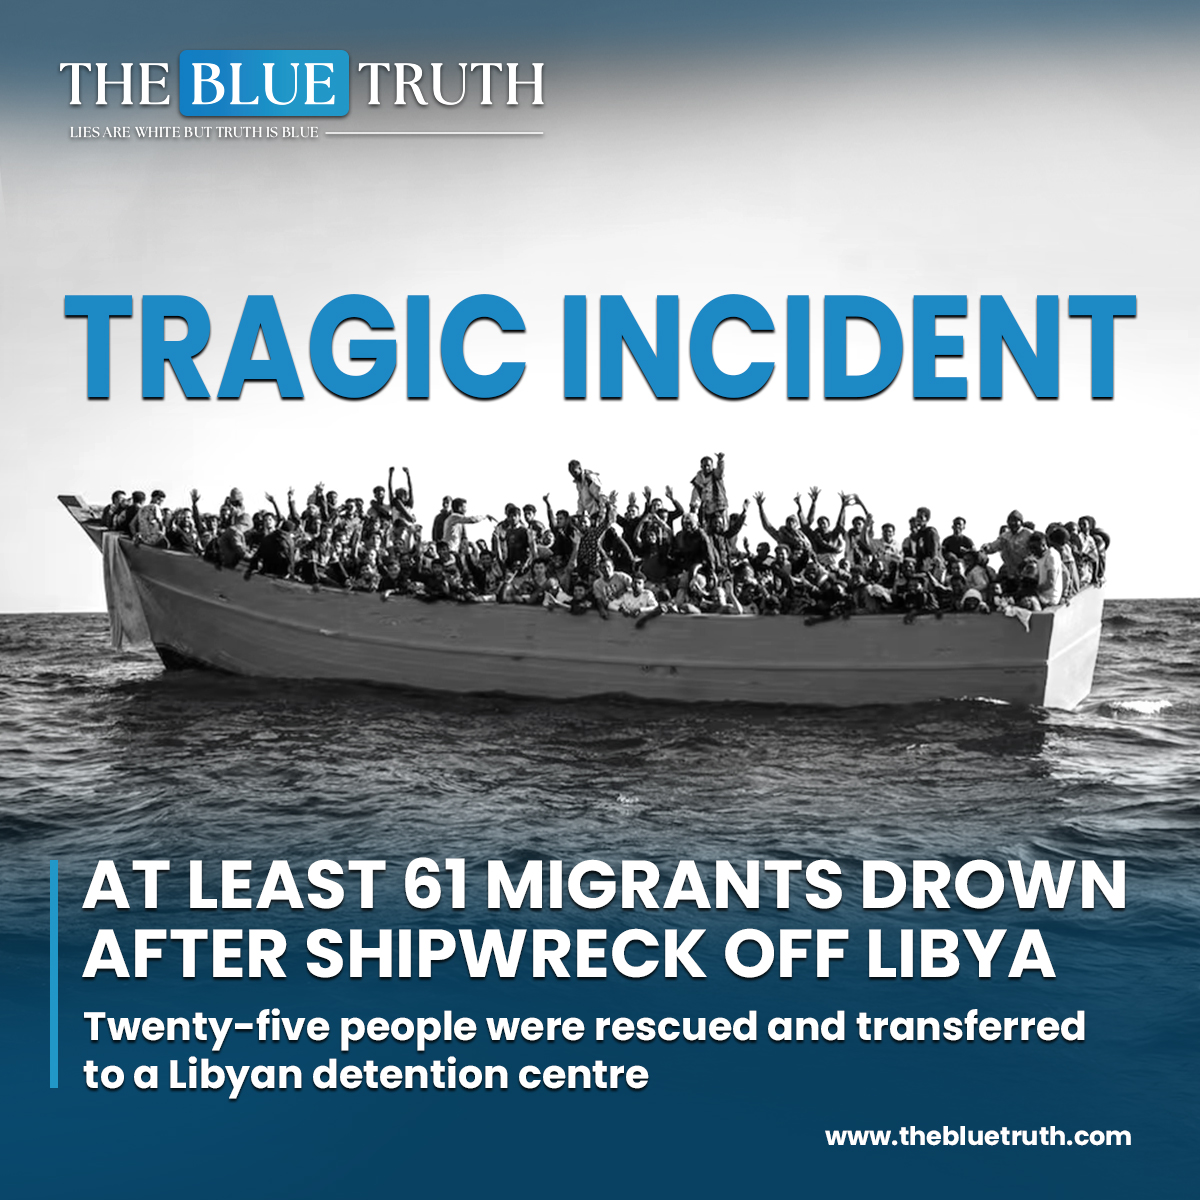 At least 61 migrants drown after a shipwreck off Libya.
Twenty-five people were rescued and transferred to a Libyan detention center.

#MigrantTragedy #Libya #BoatSinking #HumanitarianCrisis #NorthAfrica #tbt #TheBlueTruth